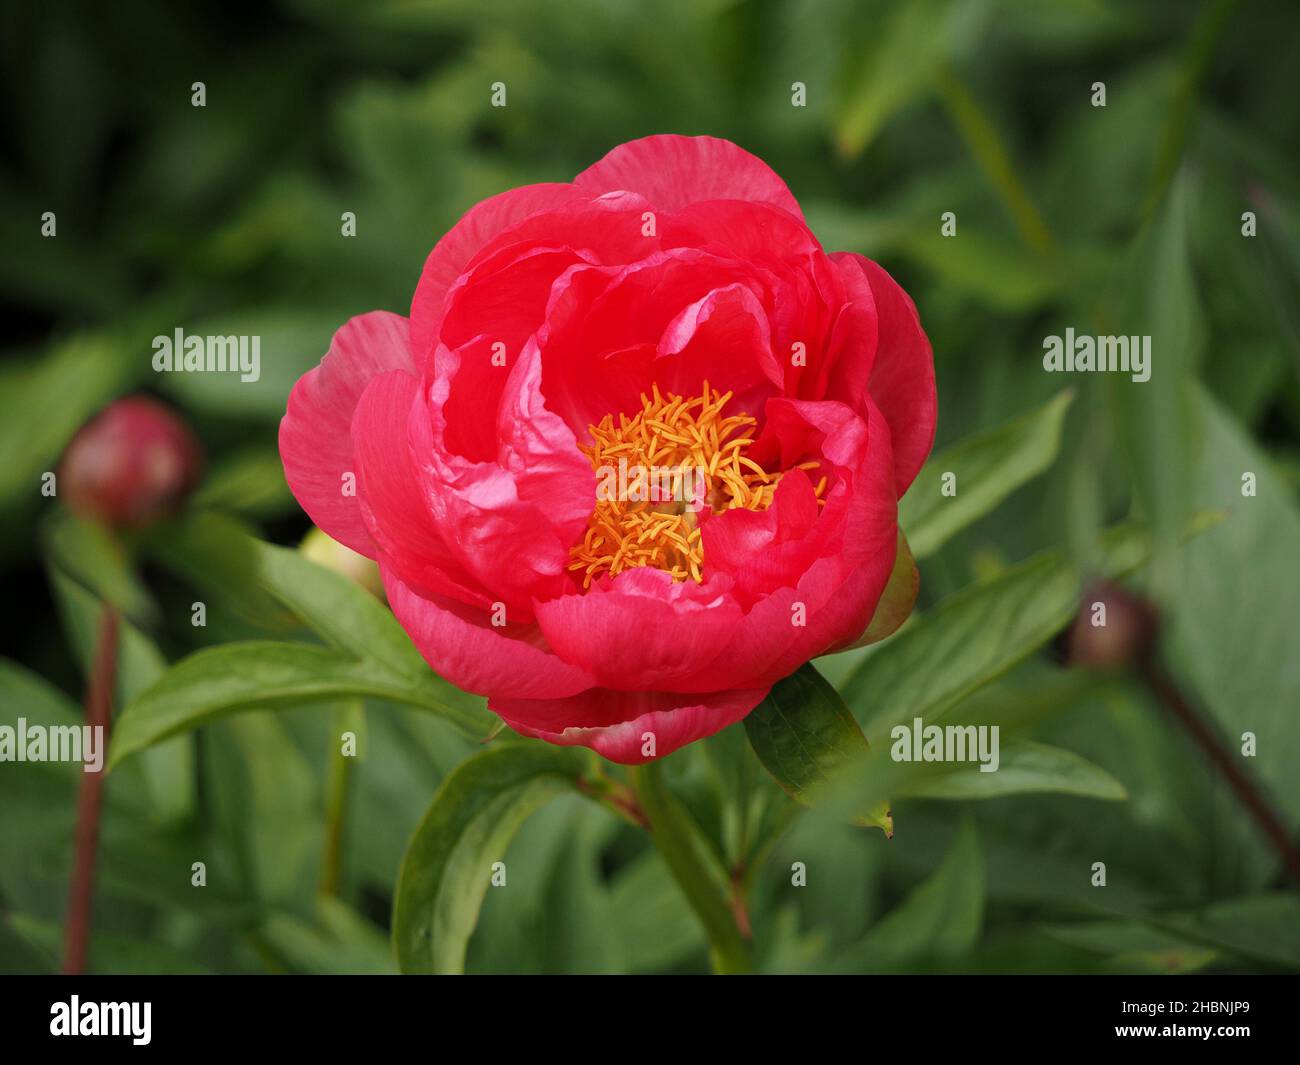 Exotic flower of cultivated Peony (Paeonia sp) with elaborate golden yellow stamens, delicate pink petals & green foliage in garden Cumbria,England,UK Stock Photo